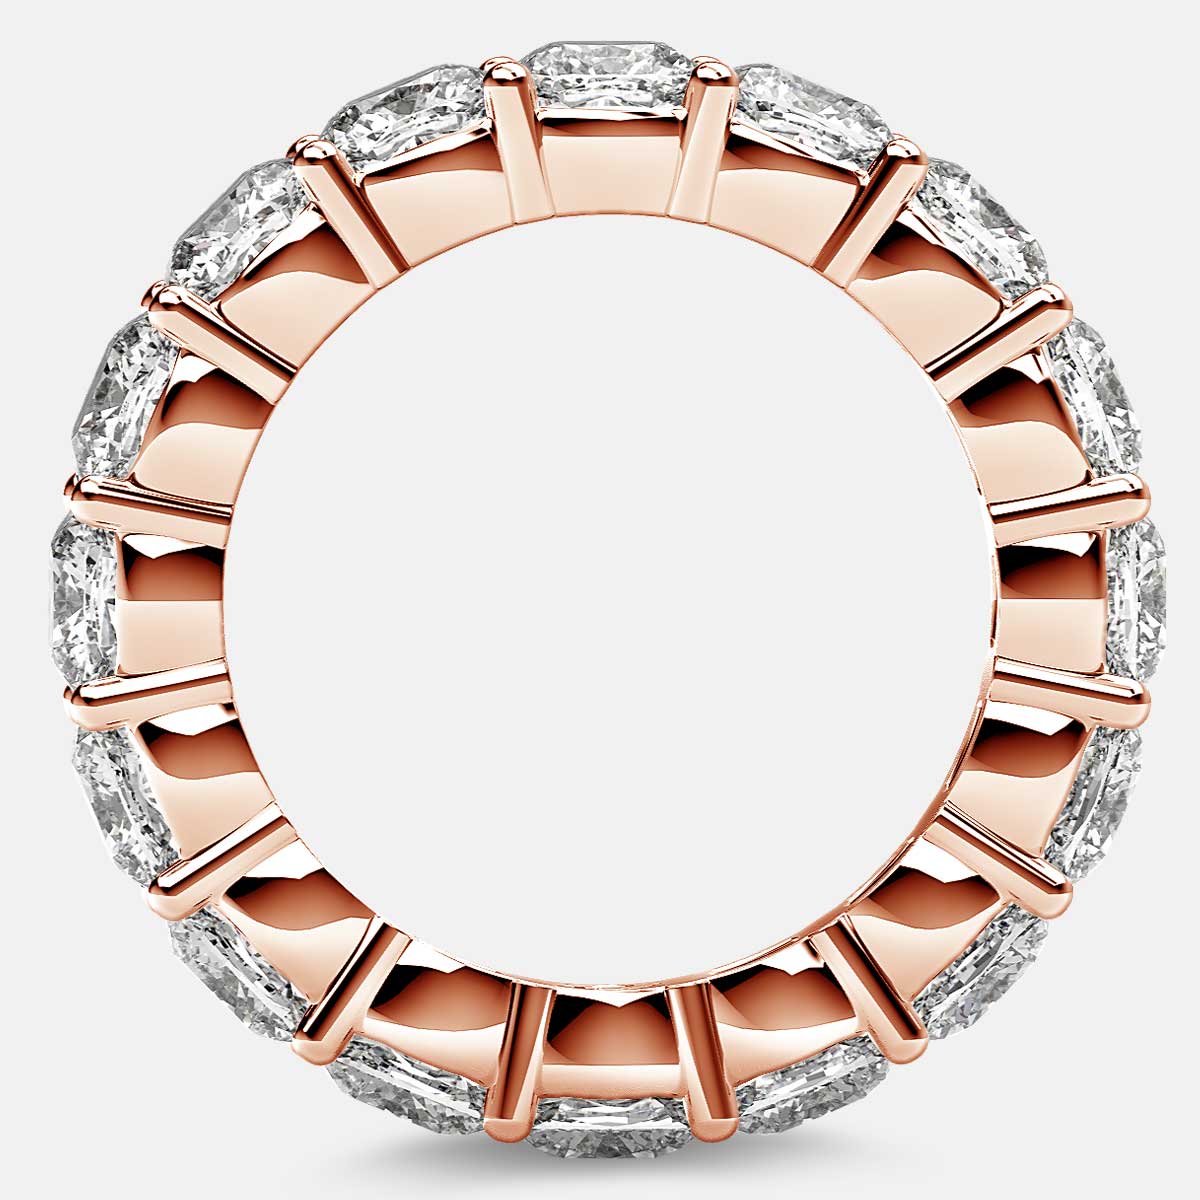 Eternity Ring with Prong Set Cushion Cut Diamonds in 18k Rose Gold